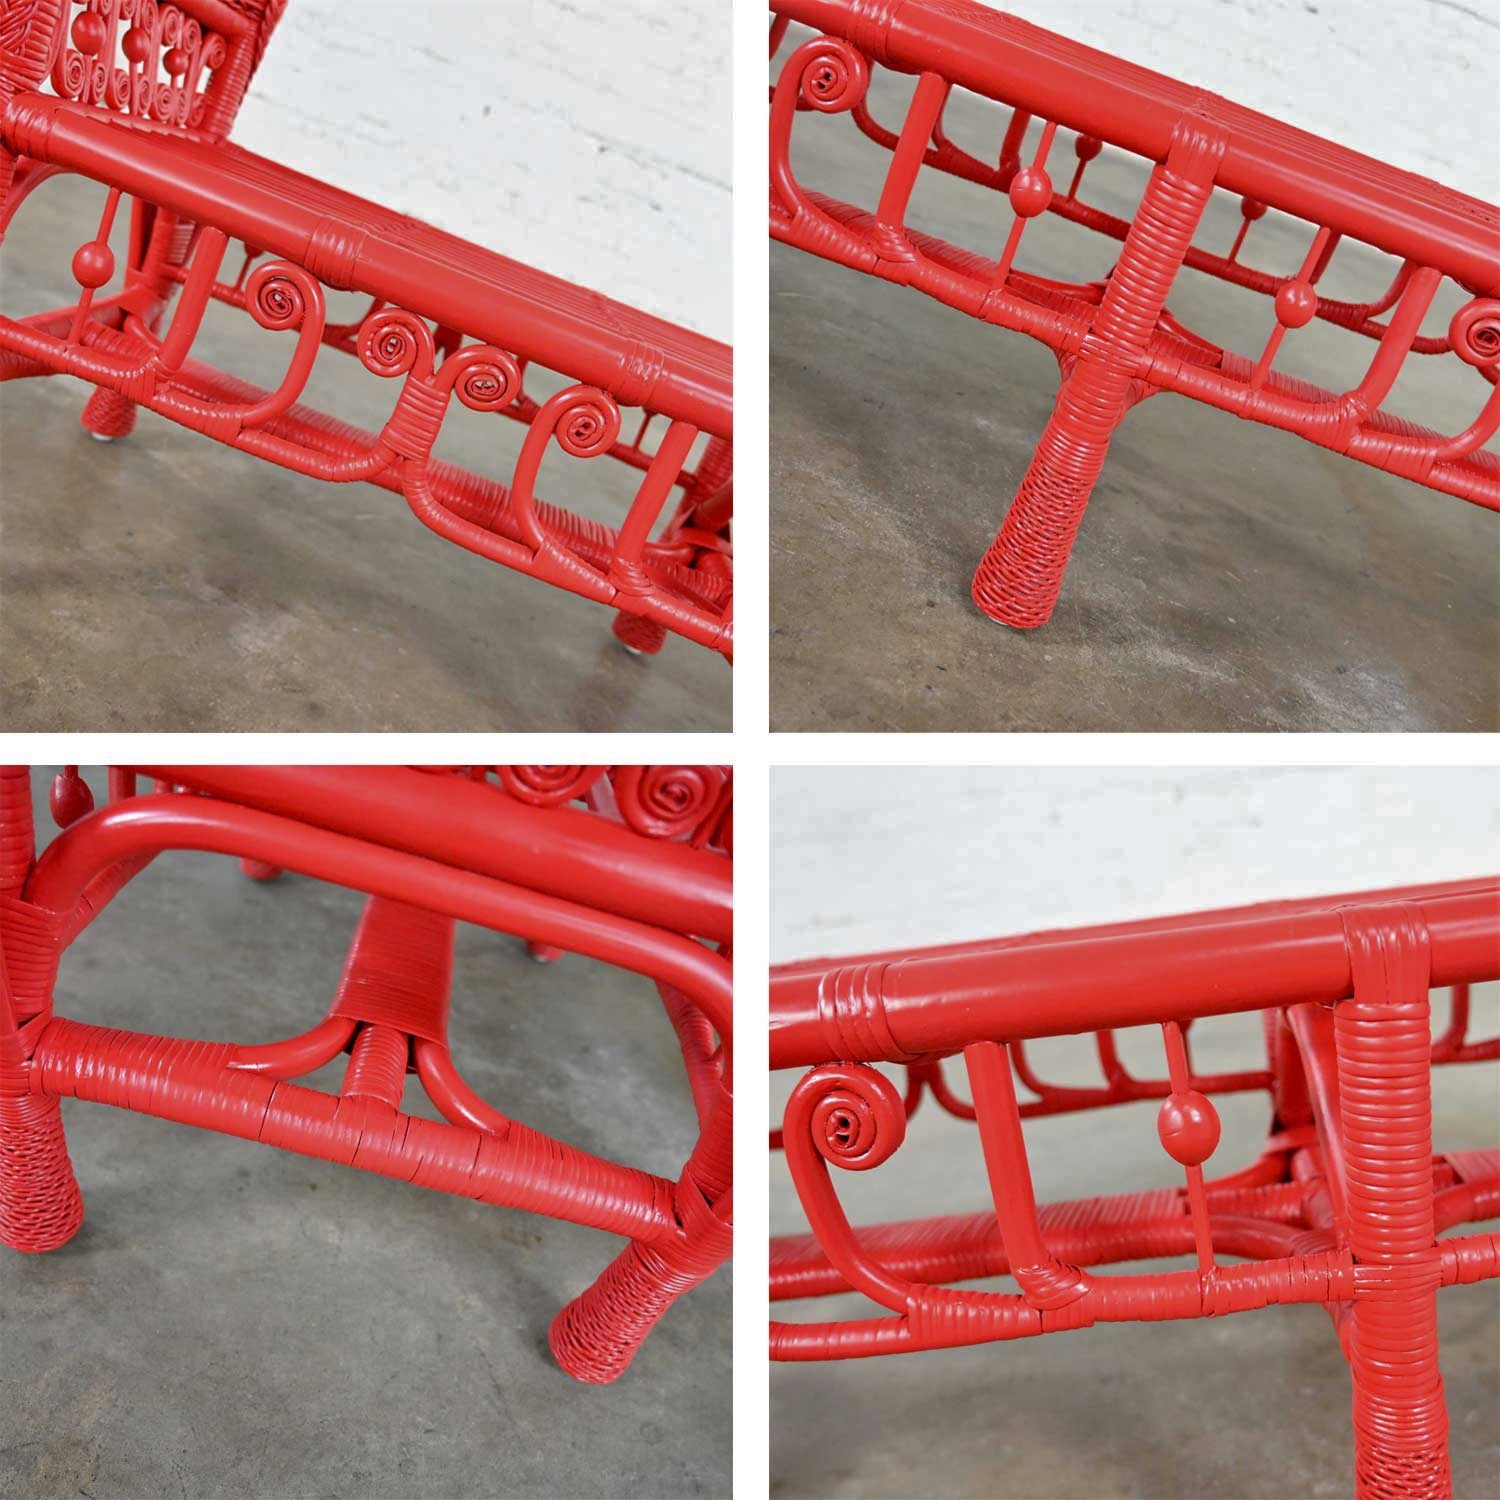 Hollywood Regency Boho Chic Poppy Red Painted Gondola Style Wicker Bench or Table